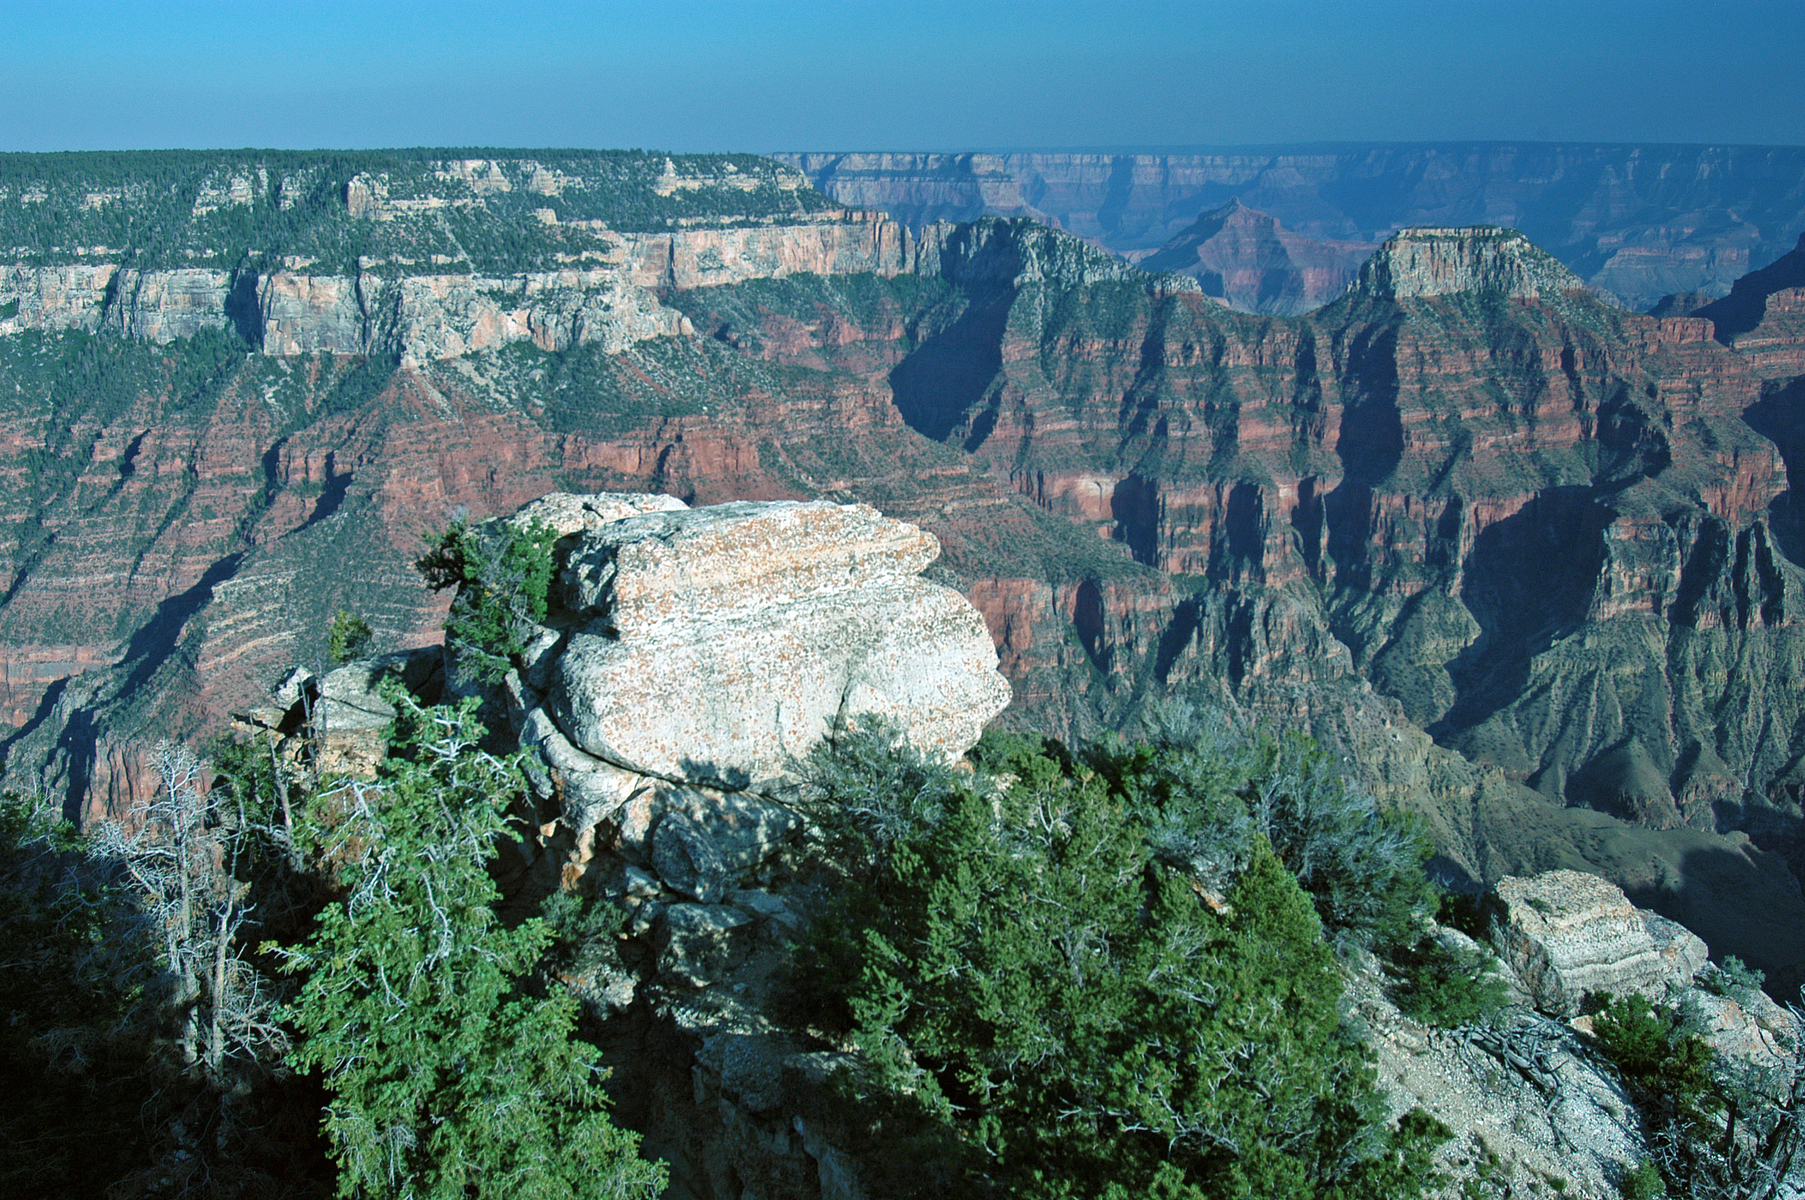 looking out over the Grand Canyon from the North Rim